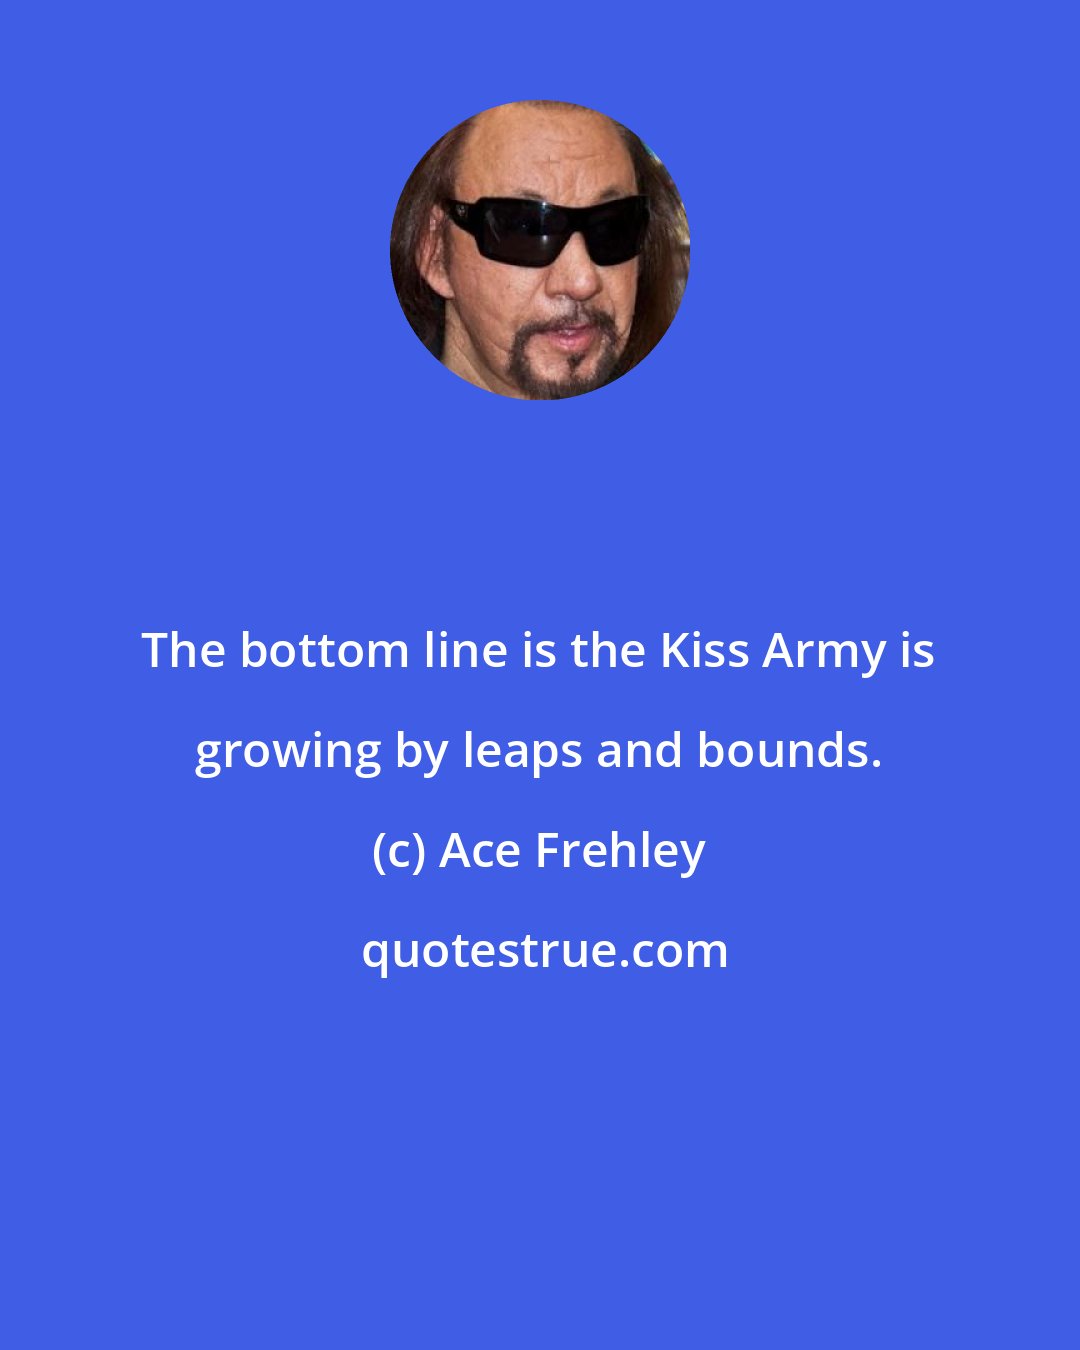 Ace Frehley: The bottom line is the Kiss Army is growing by leaps and bounds.